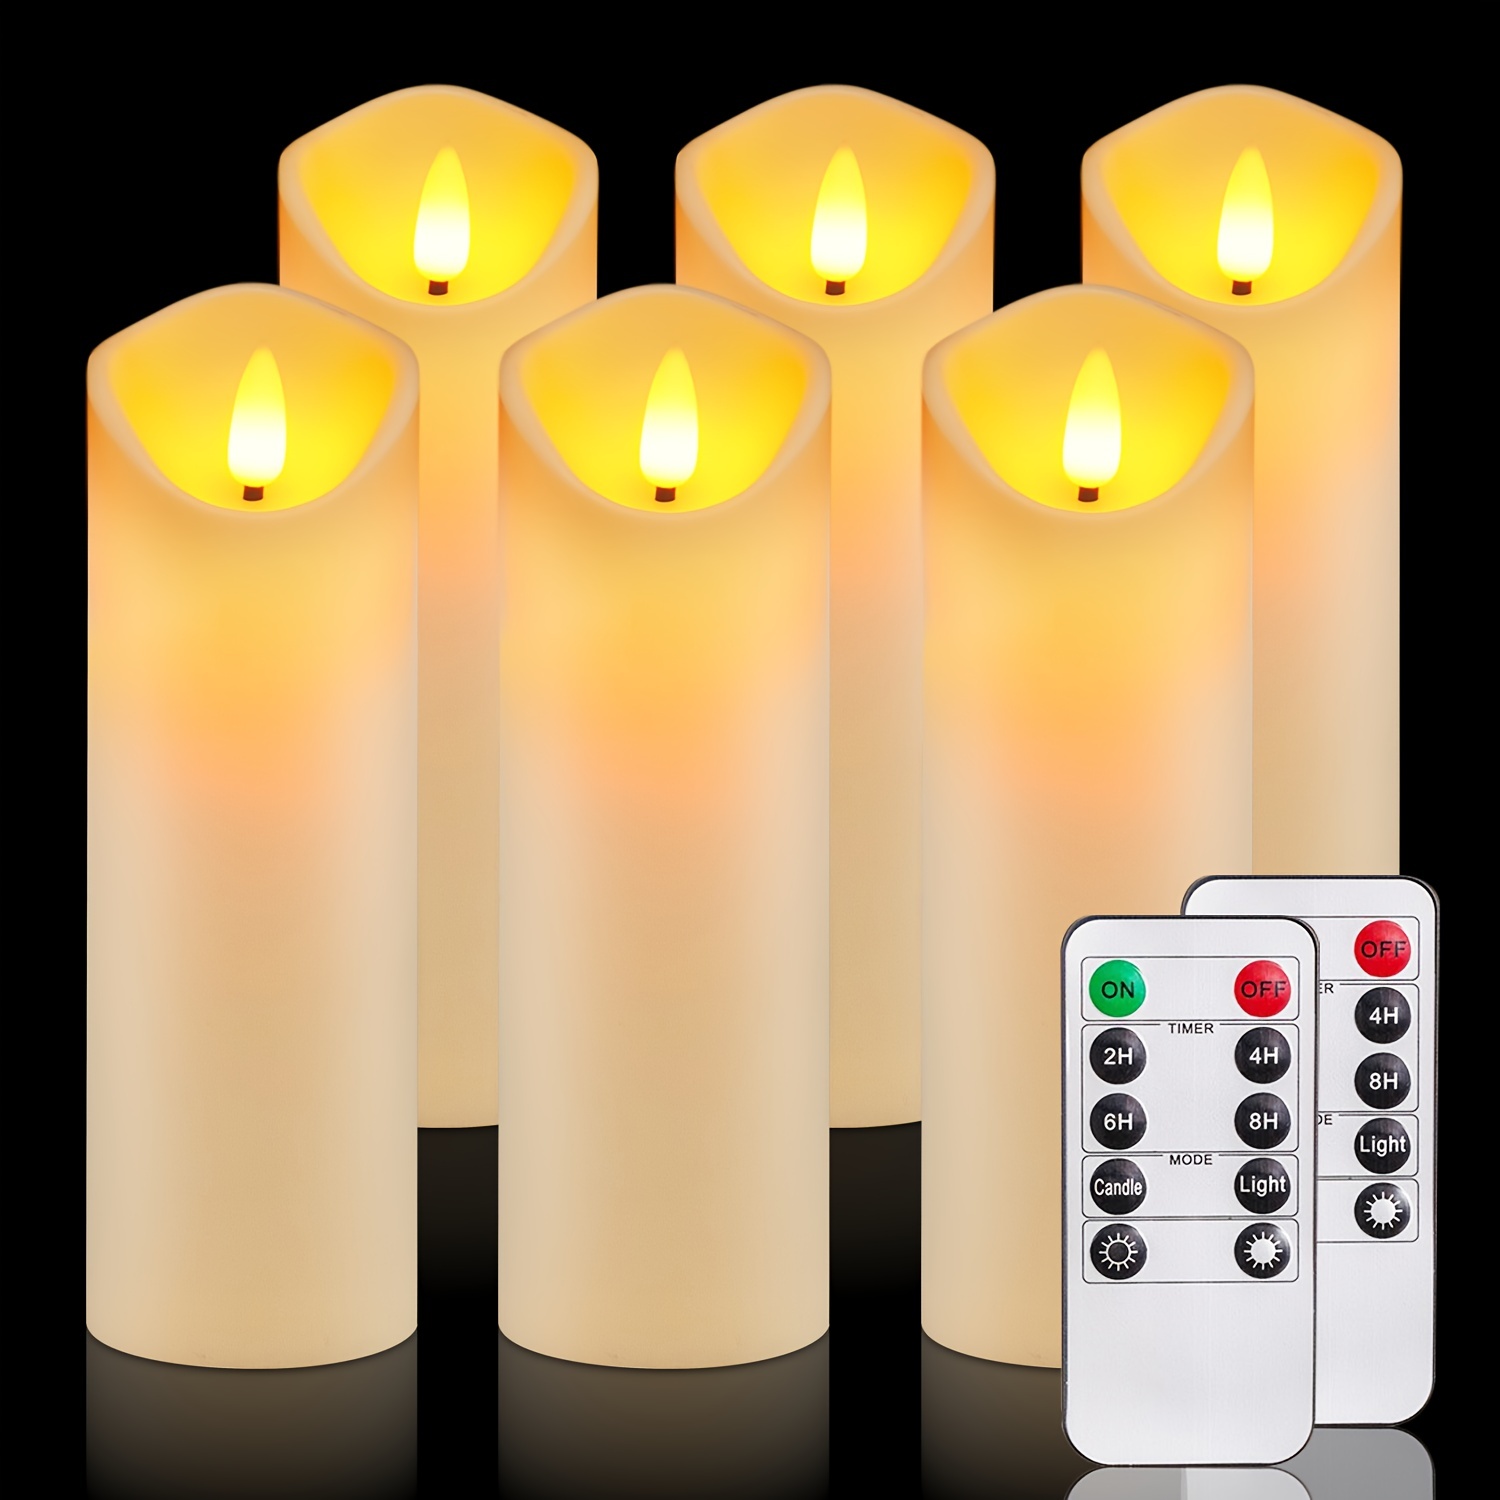 Outdoor Flameless Color Changing Candle Pillar w/ Remote - Melted